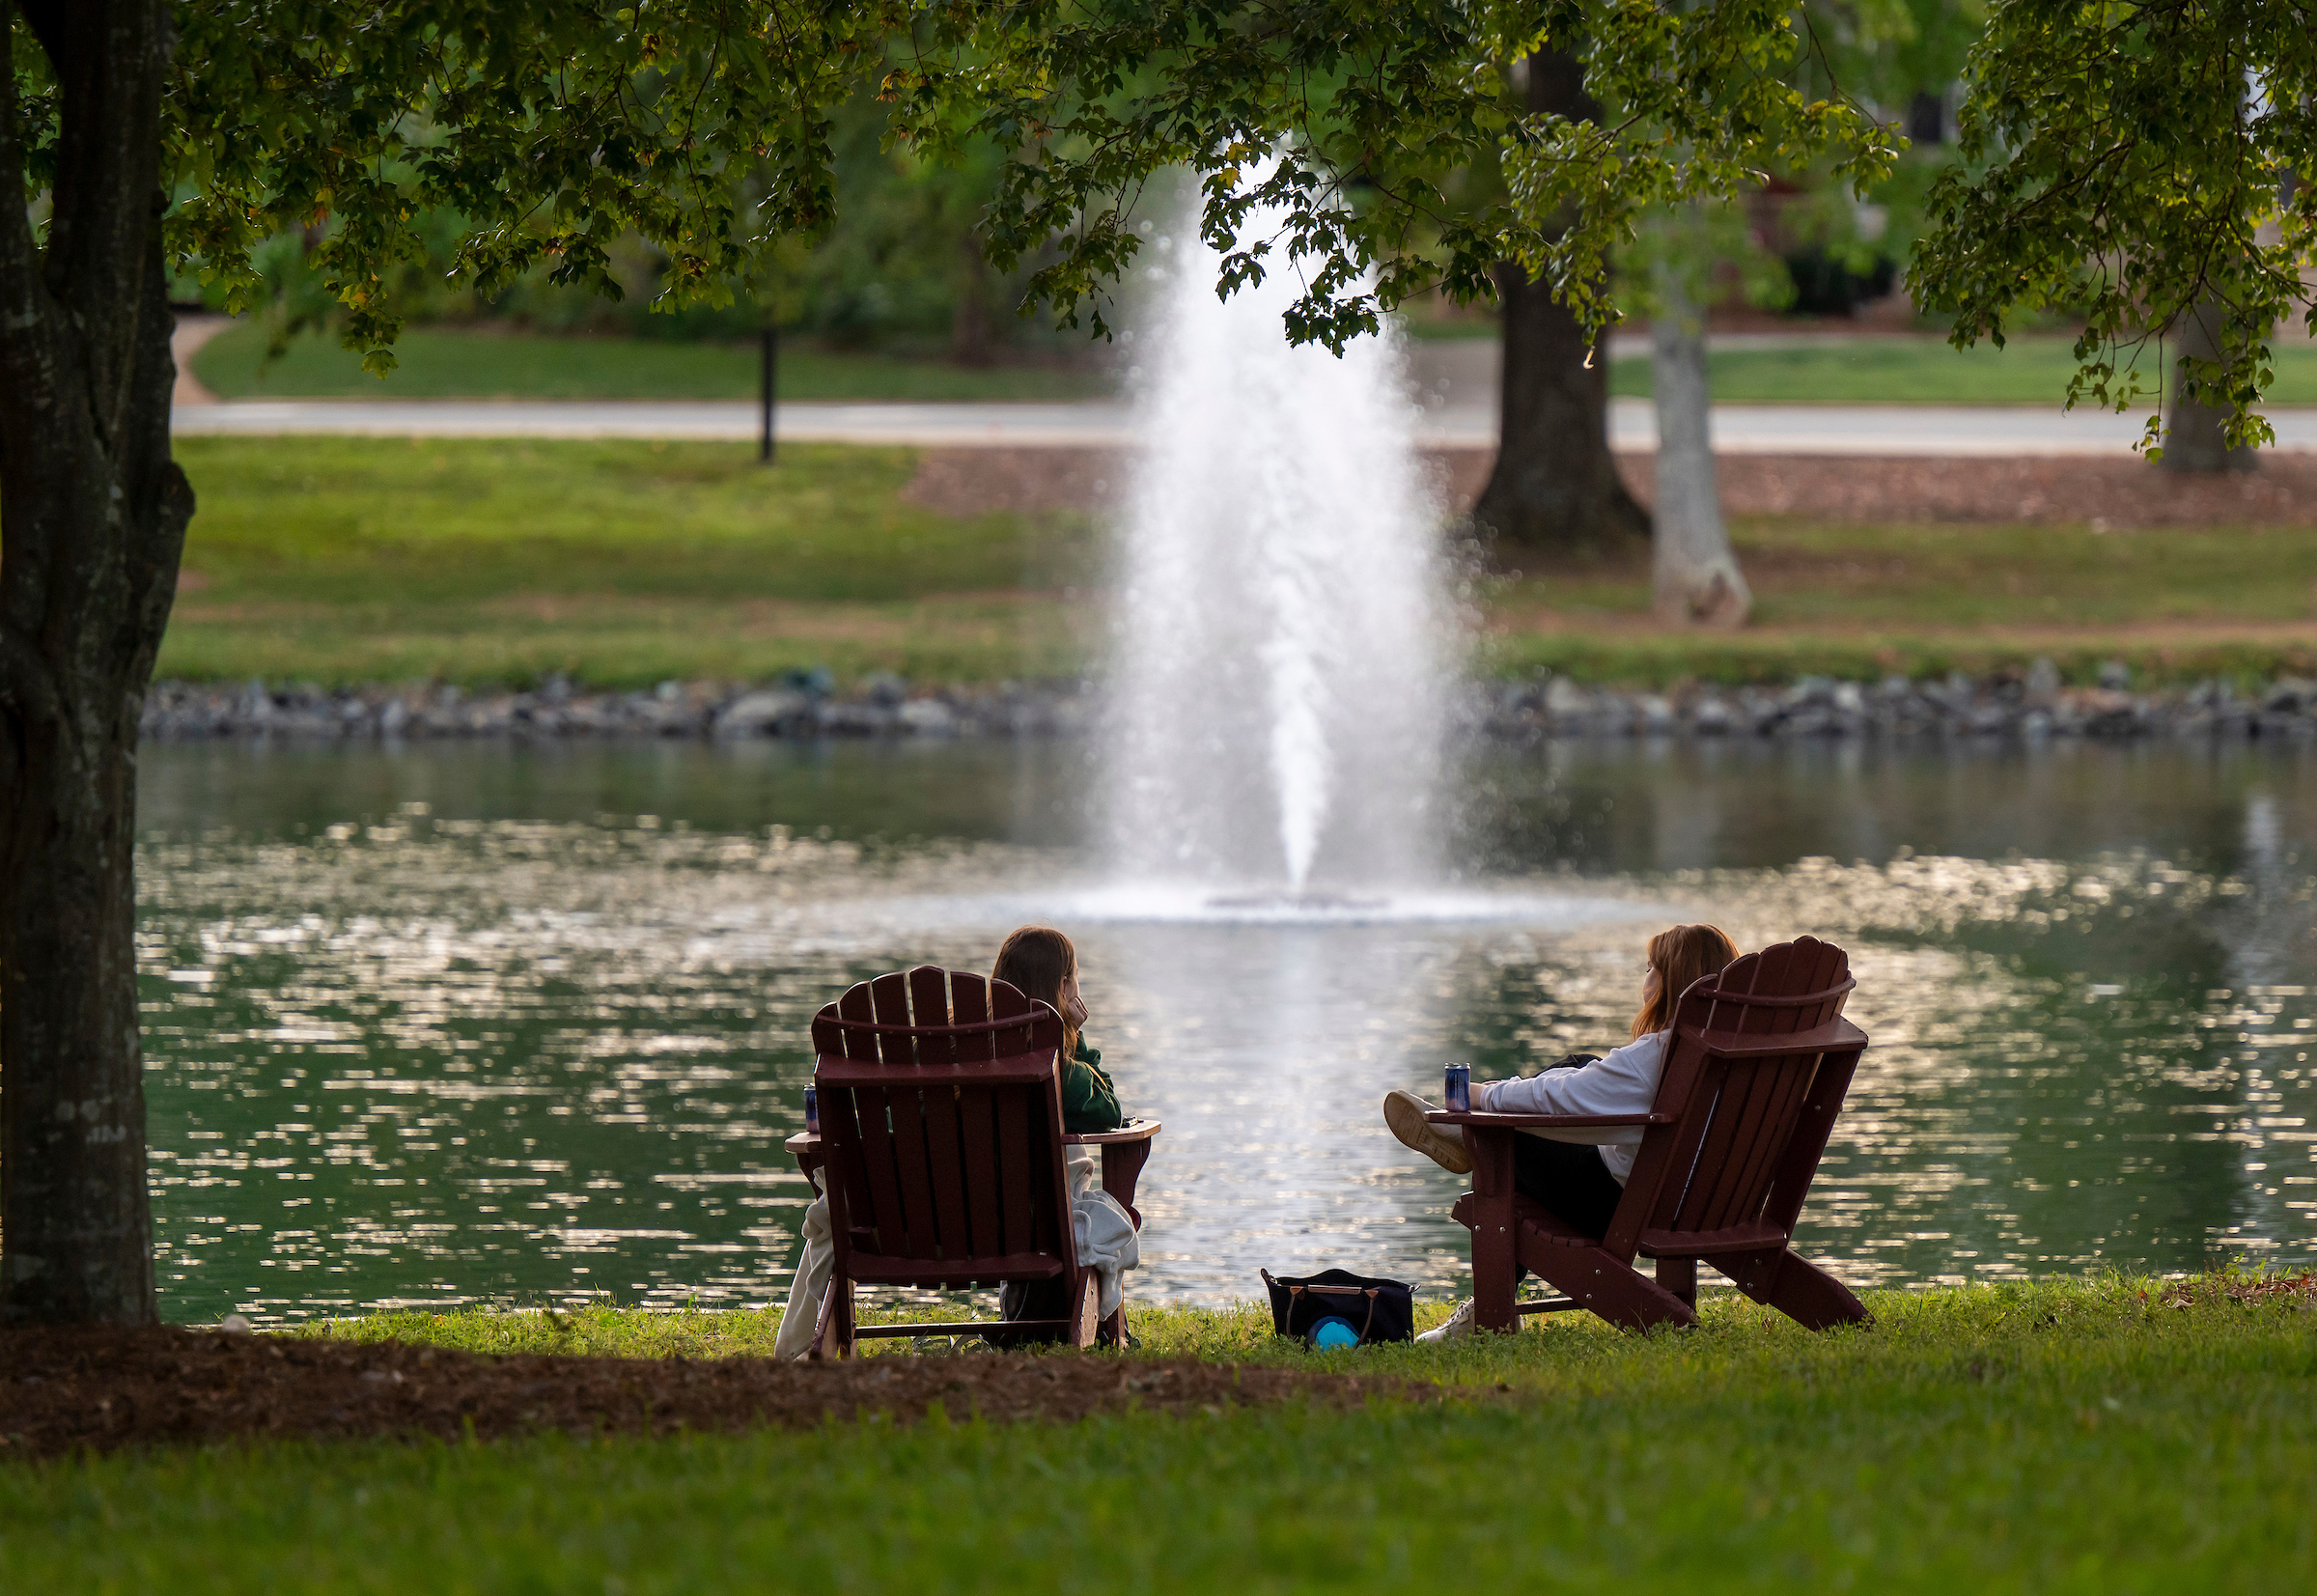 People sitting by Lake Mary Nell watching the fountain.